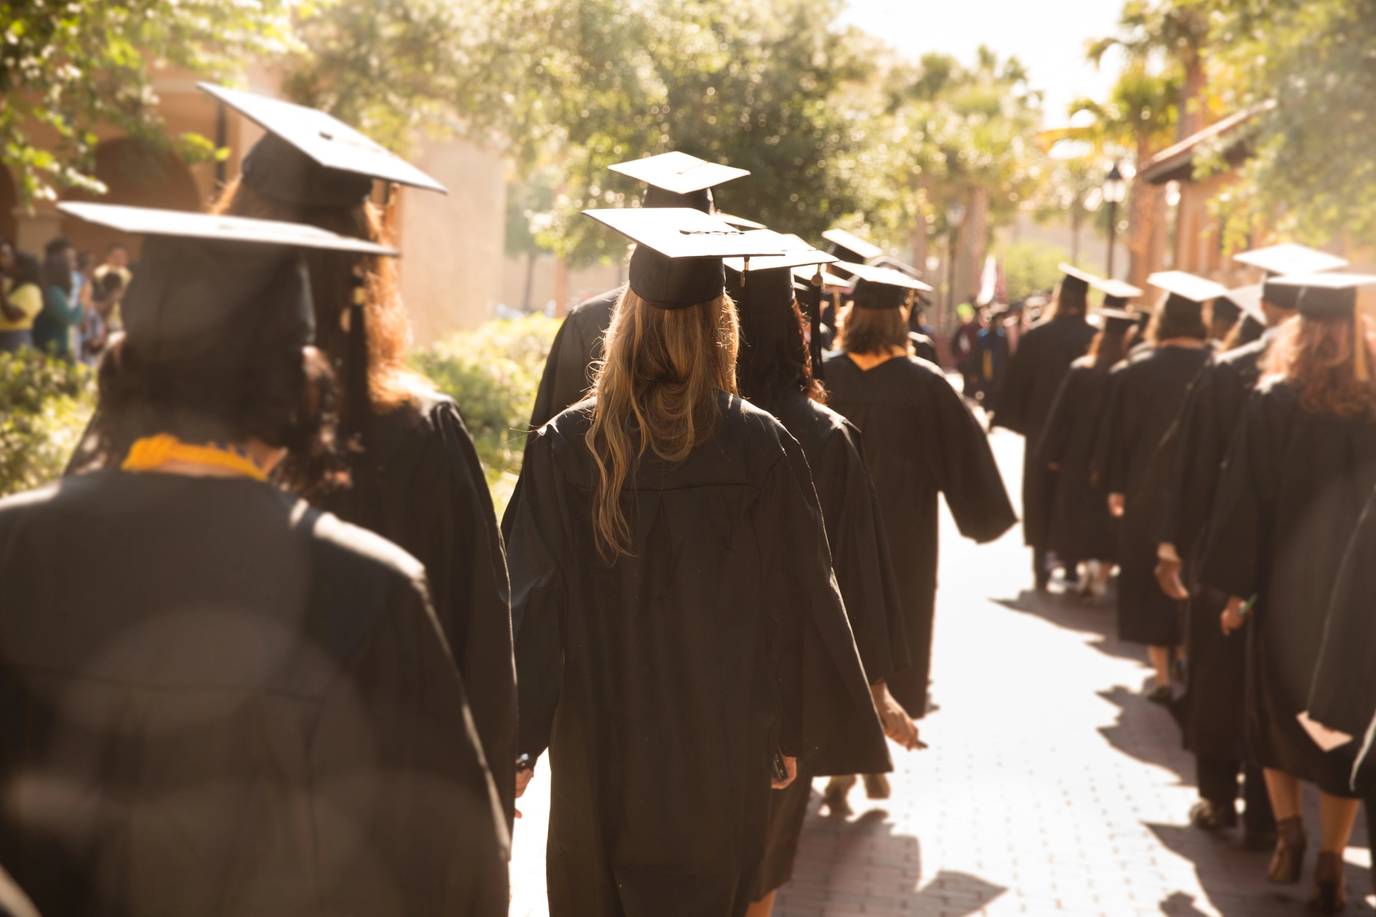 Students in gaps and gowns walk to commencement at Rollins College, one of the best colleges for transfer students.